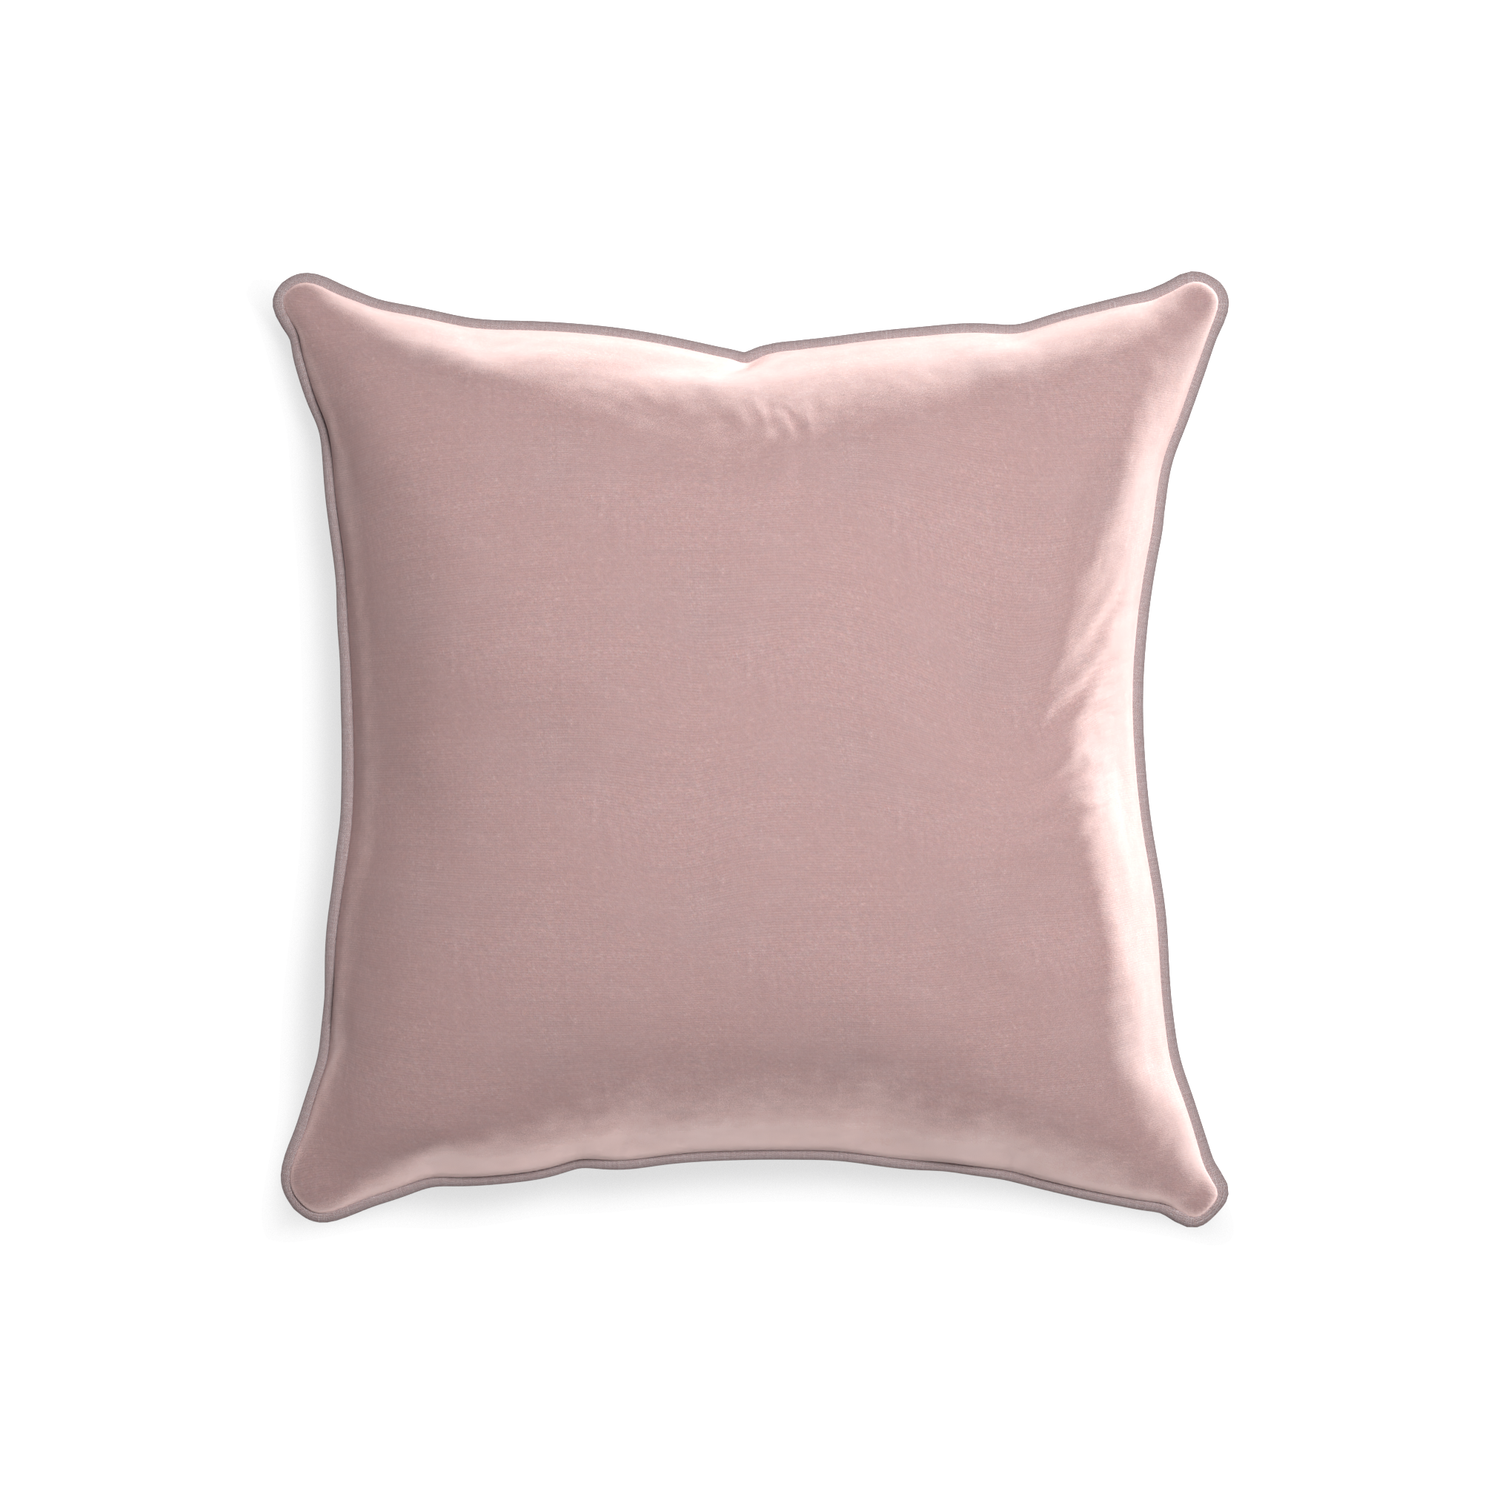 20-square mauve velvet custom mauvepillow with orchid piping on white background